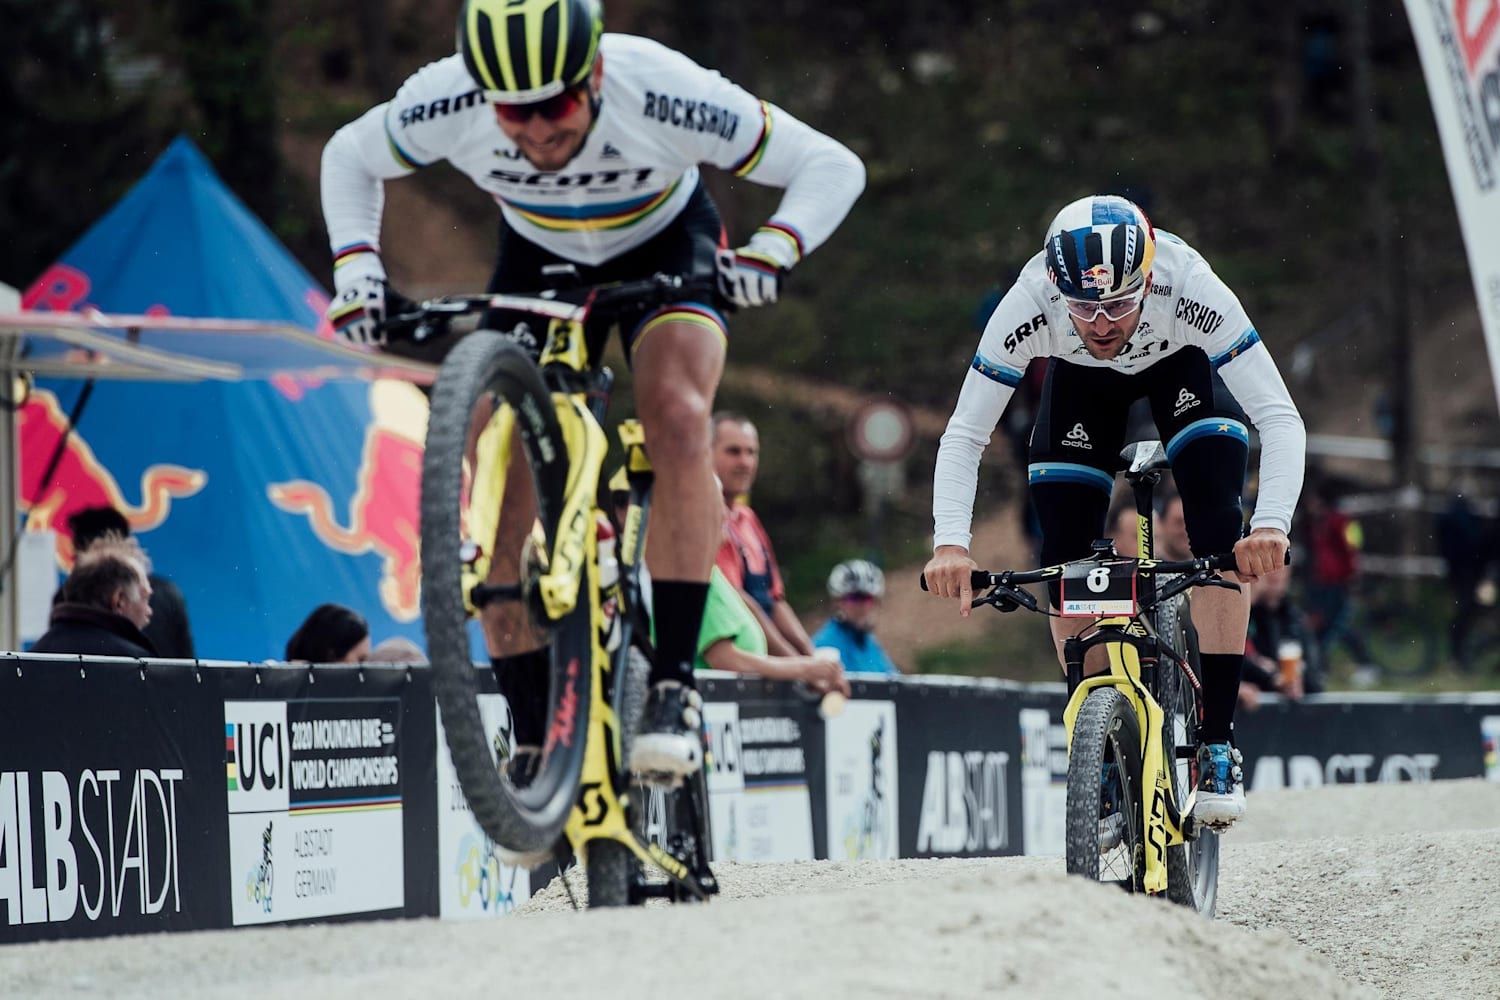 Uci Mtb World Cup 2019 Rd1 Xcc Report Video Replay 